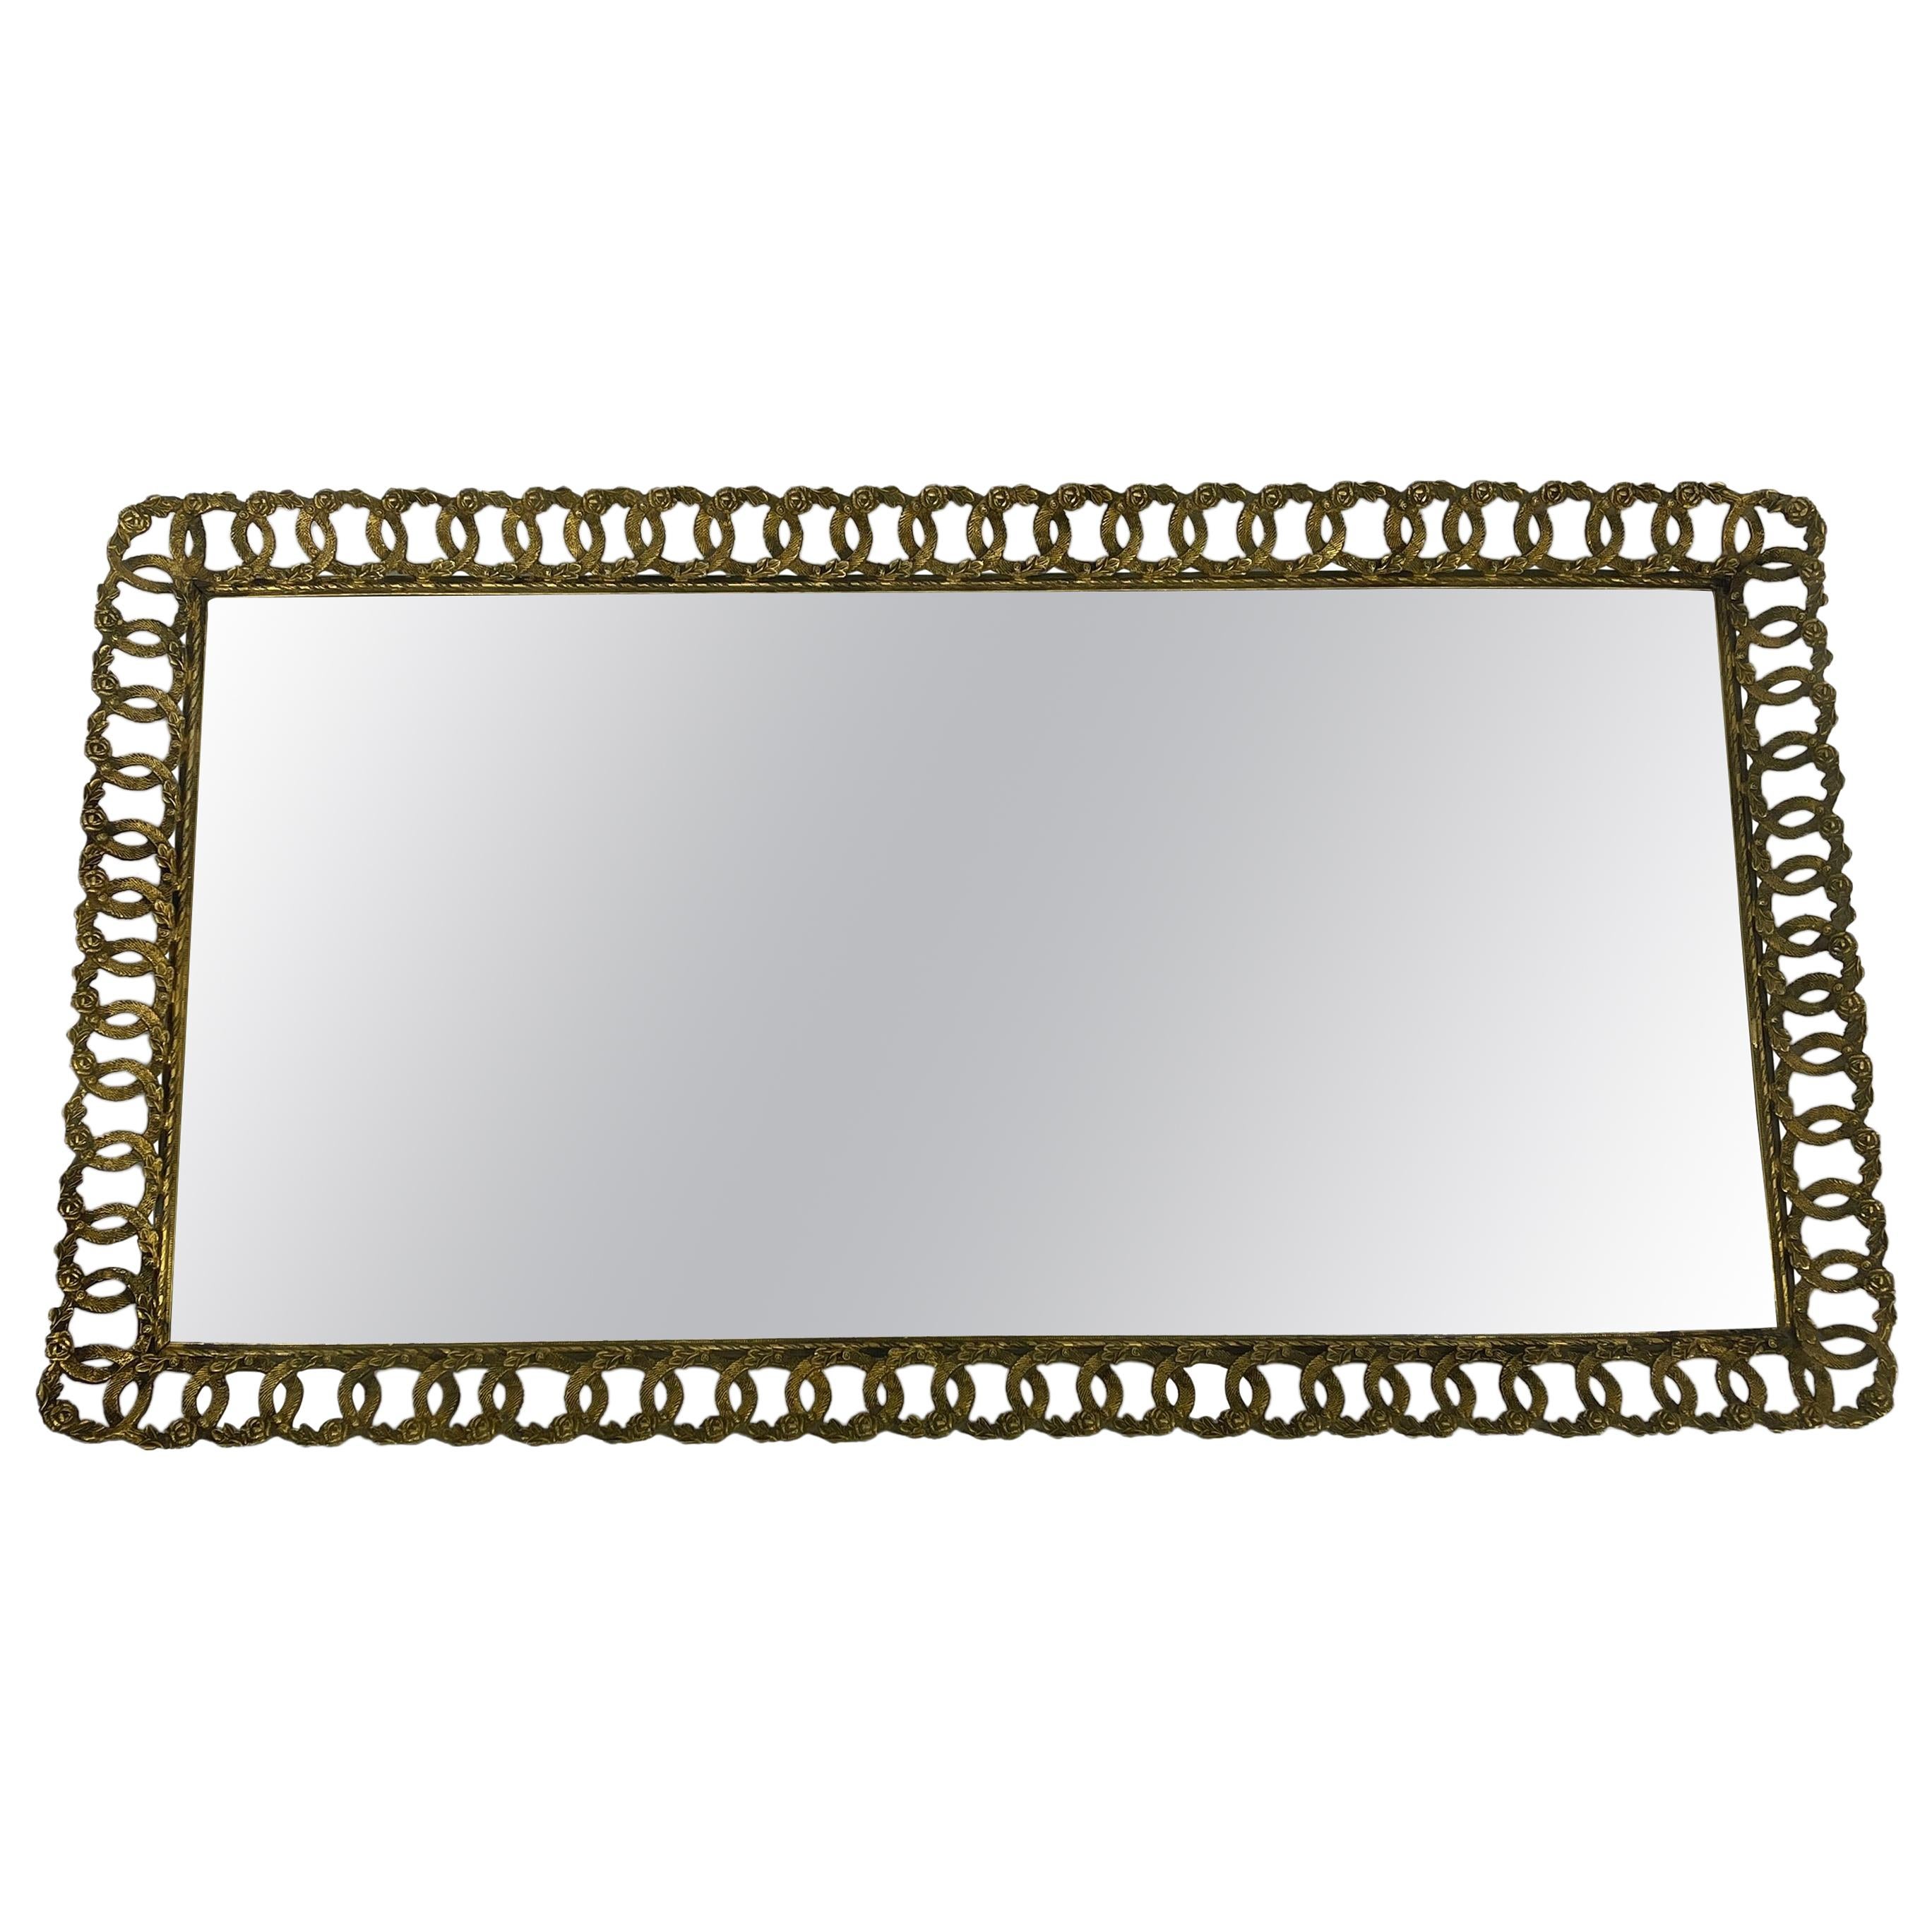 Hollywood Regency Gilded Mirrored Serving Tray with Filigree Design